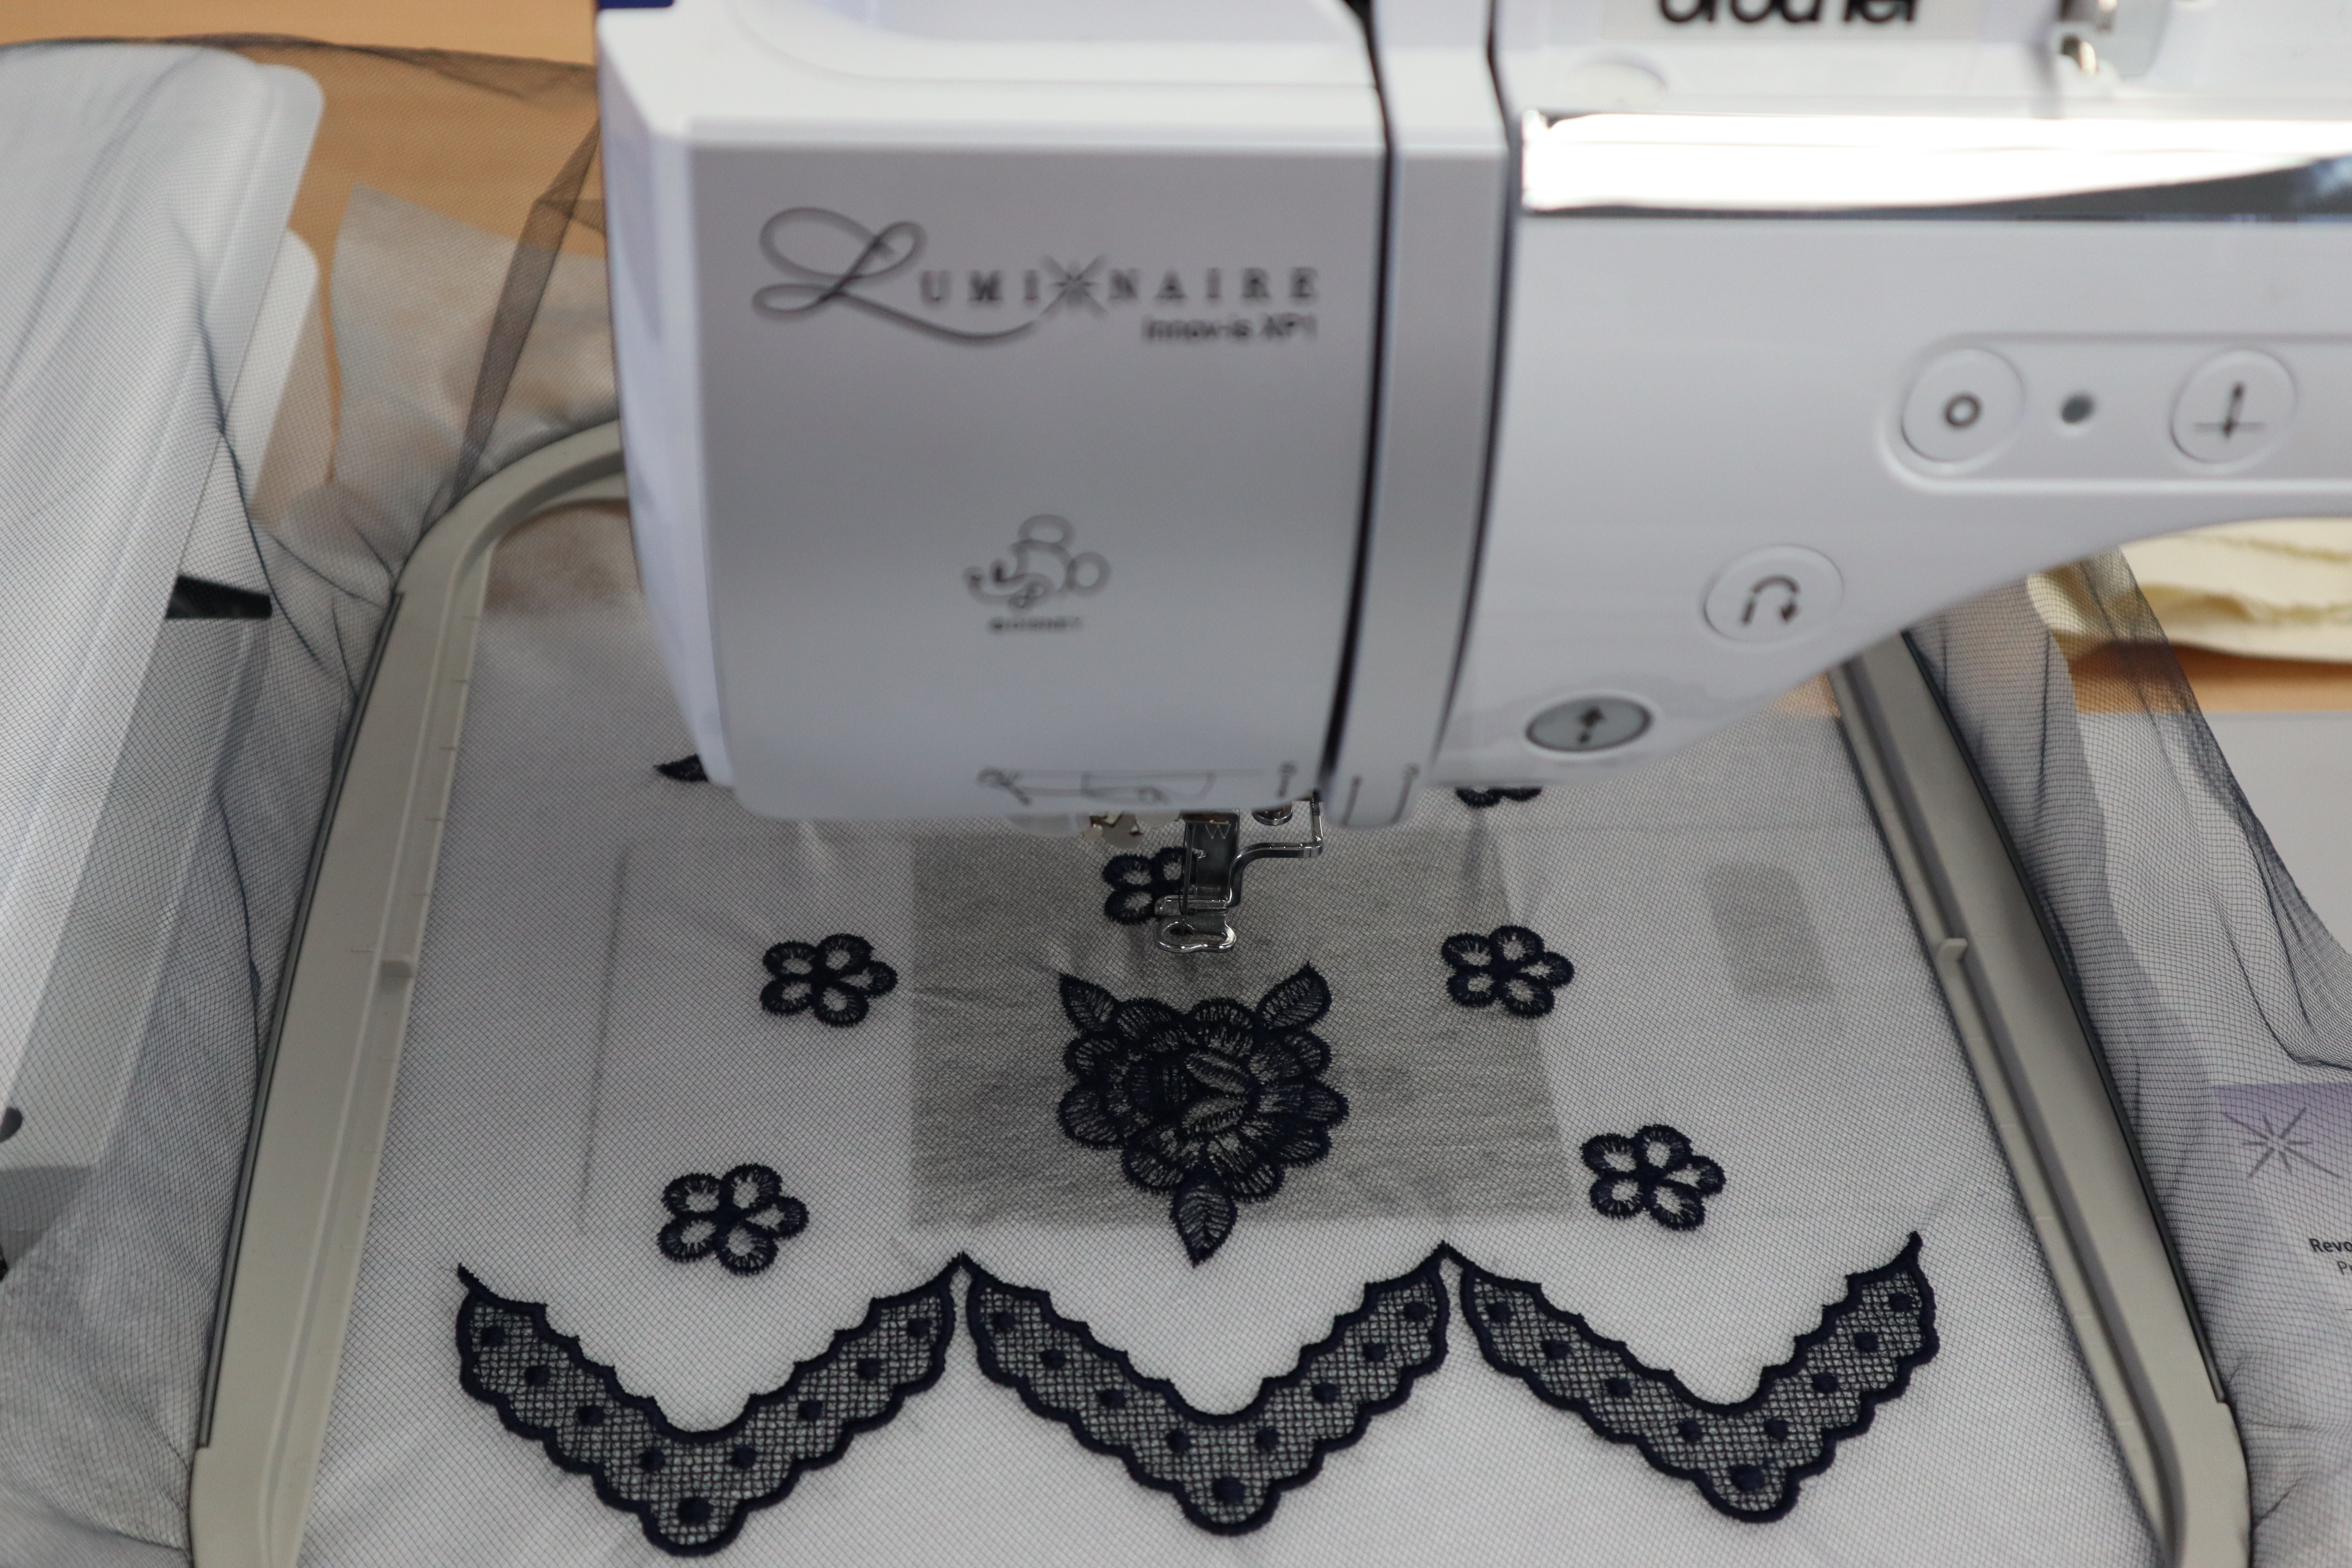 Machine Embroidery Lace Patterns Embroider Lace On Tulle Fabric Tutorial Angela Wolfs Sewing Blog